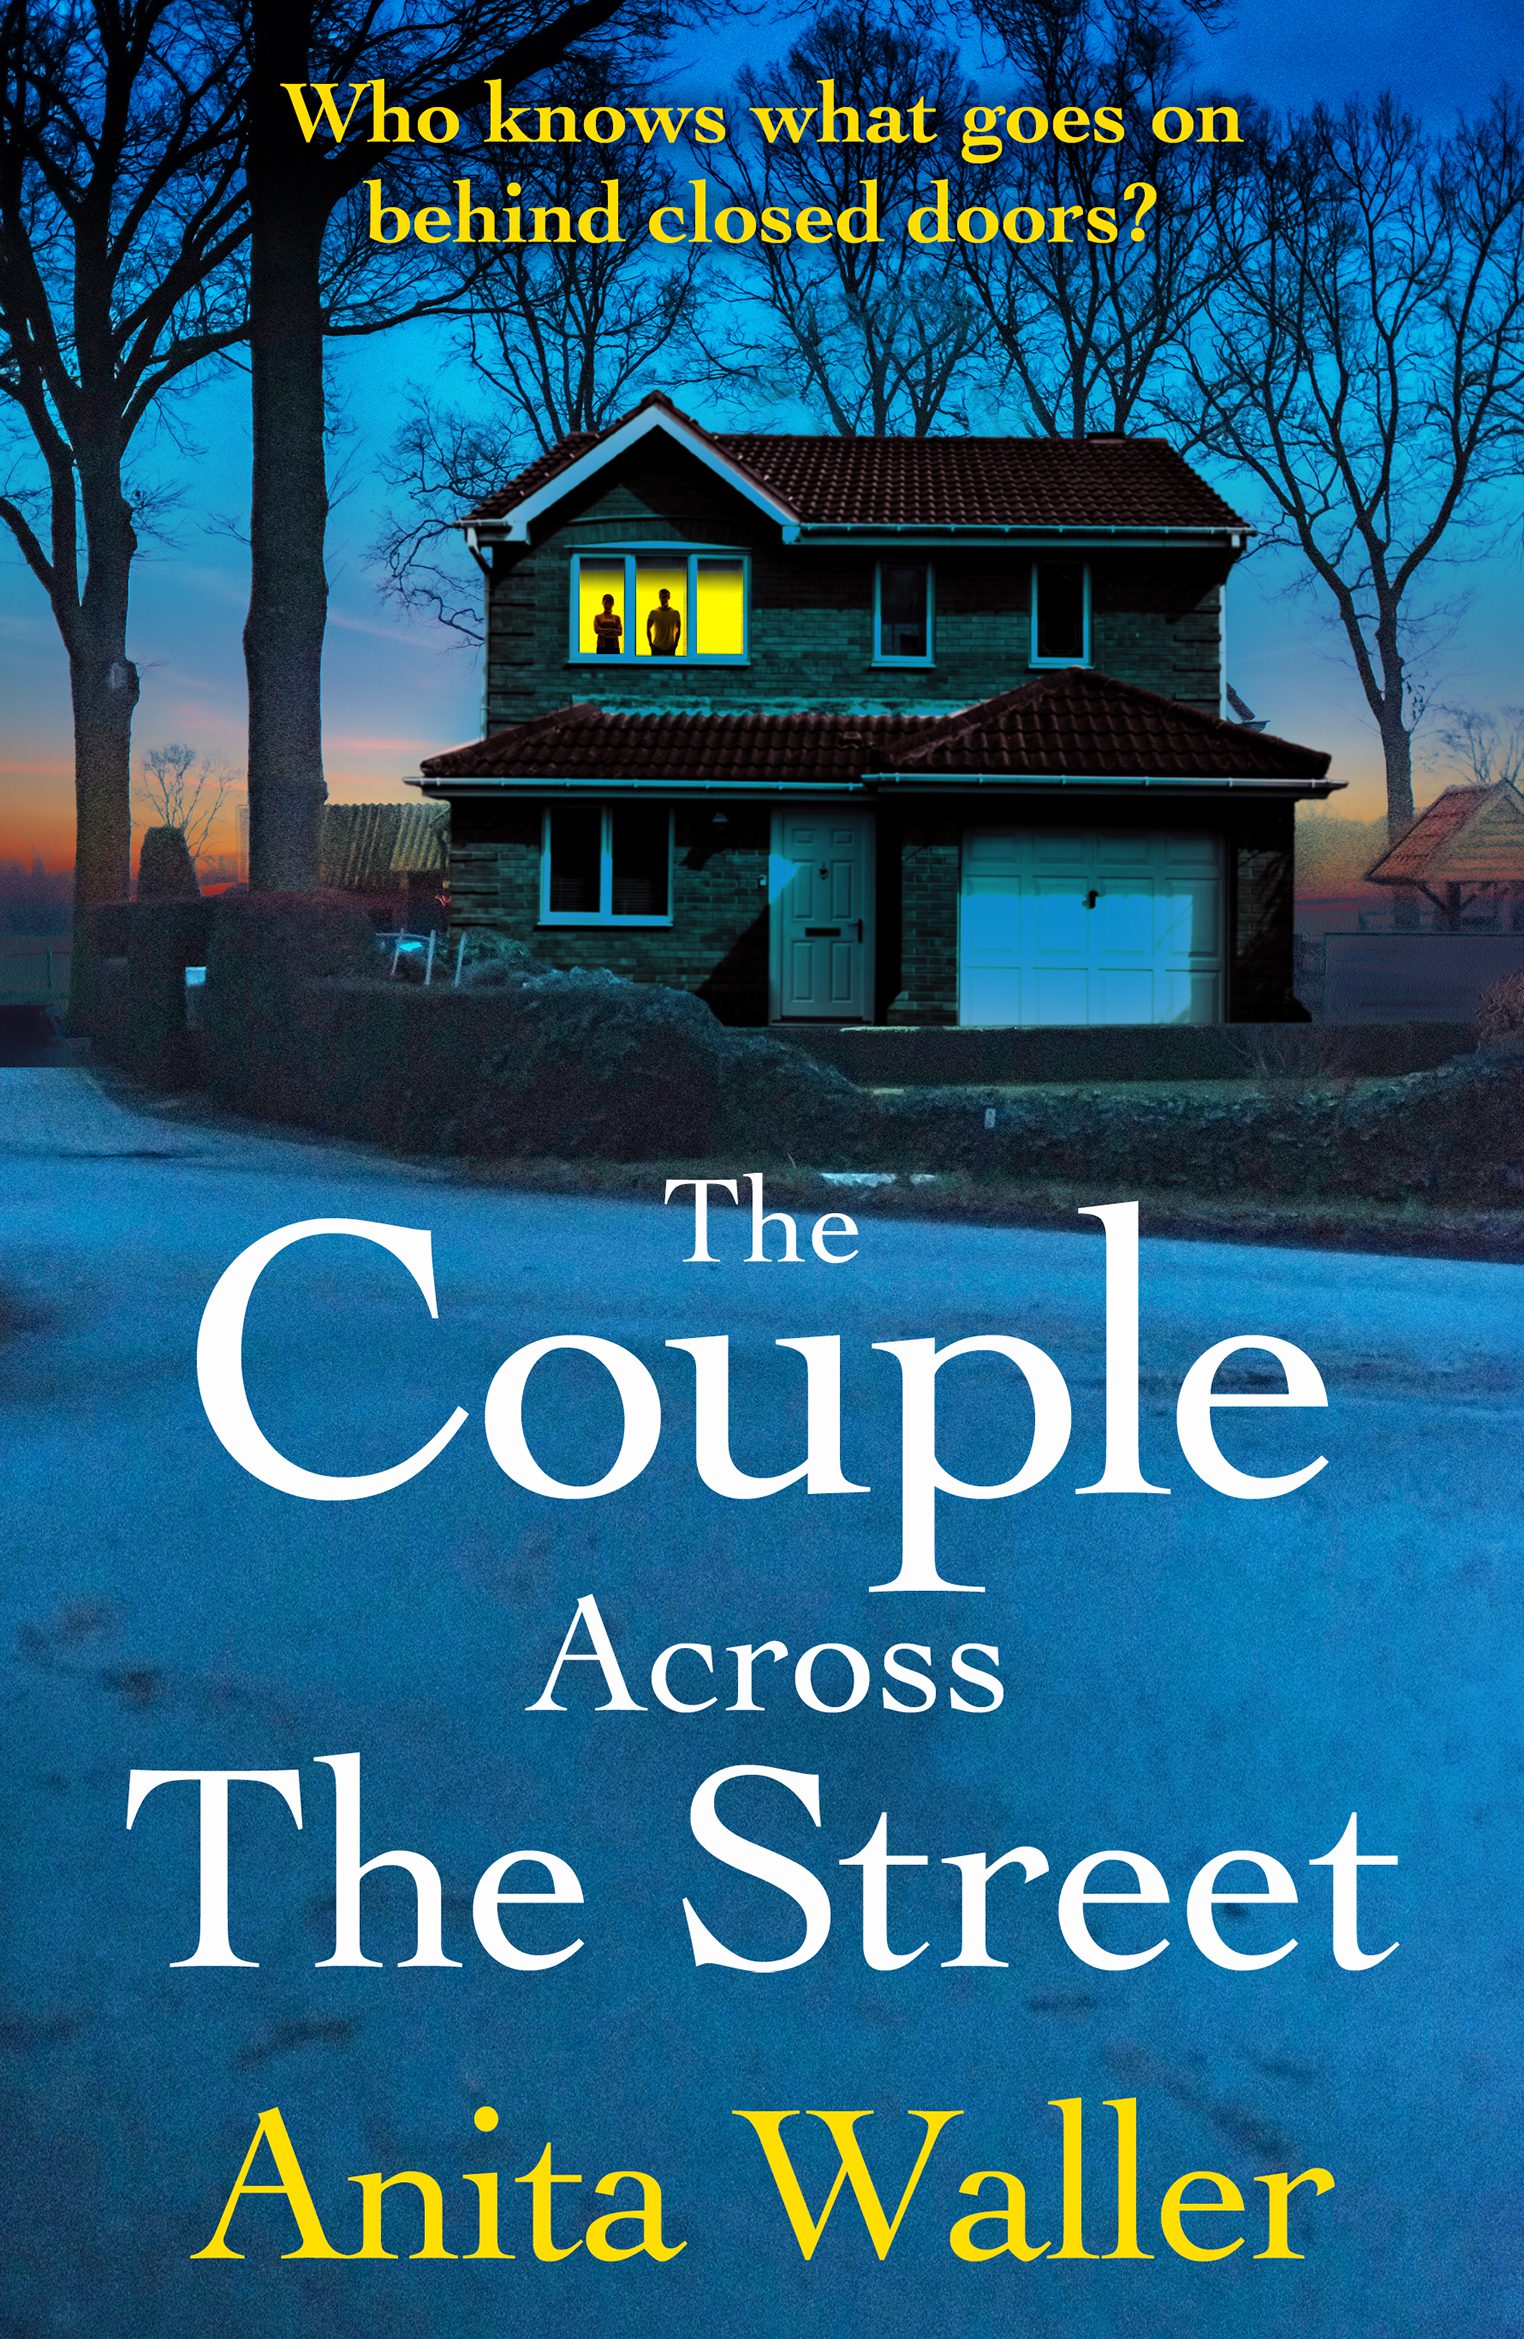 The Couple Across The Street book cover